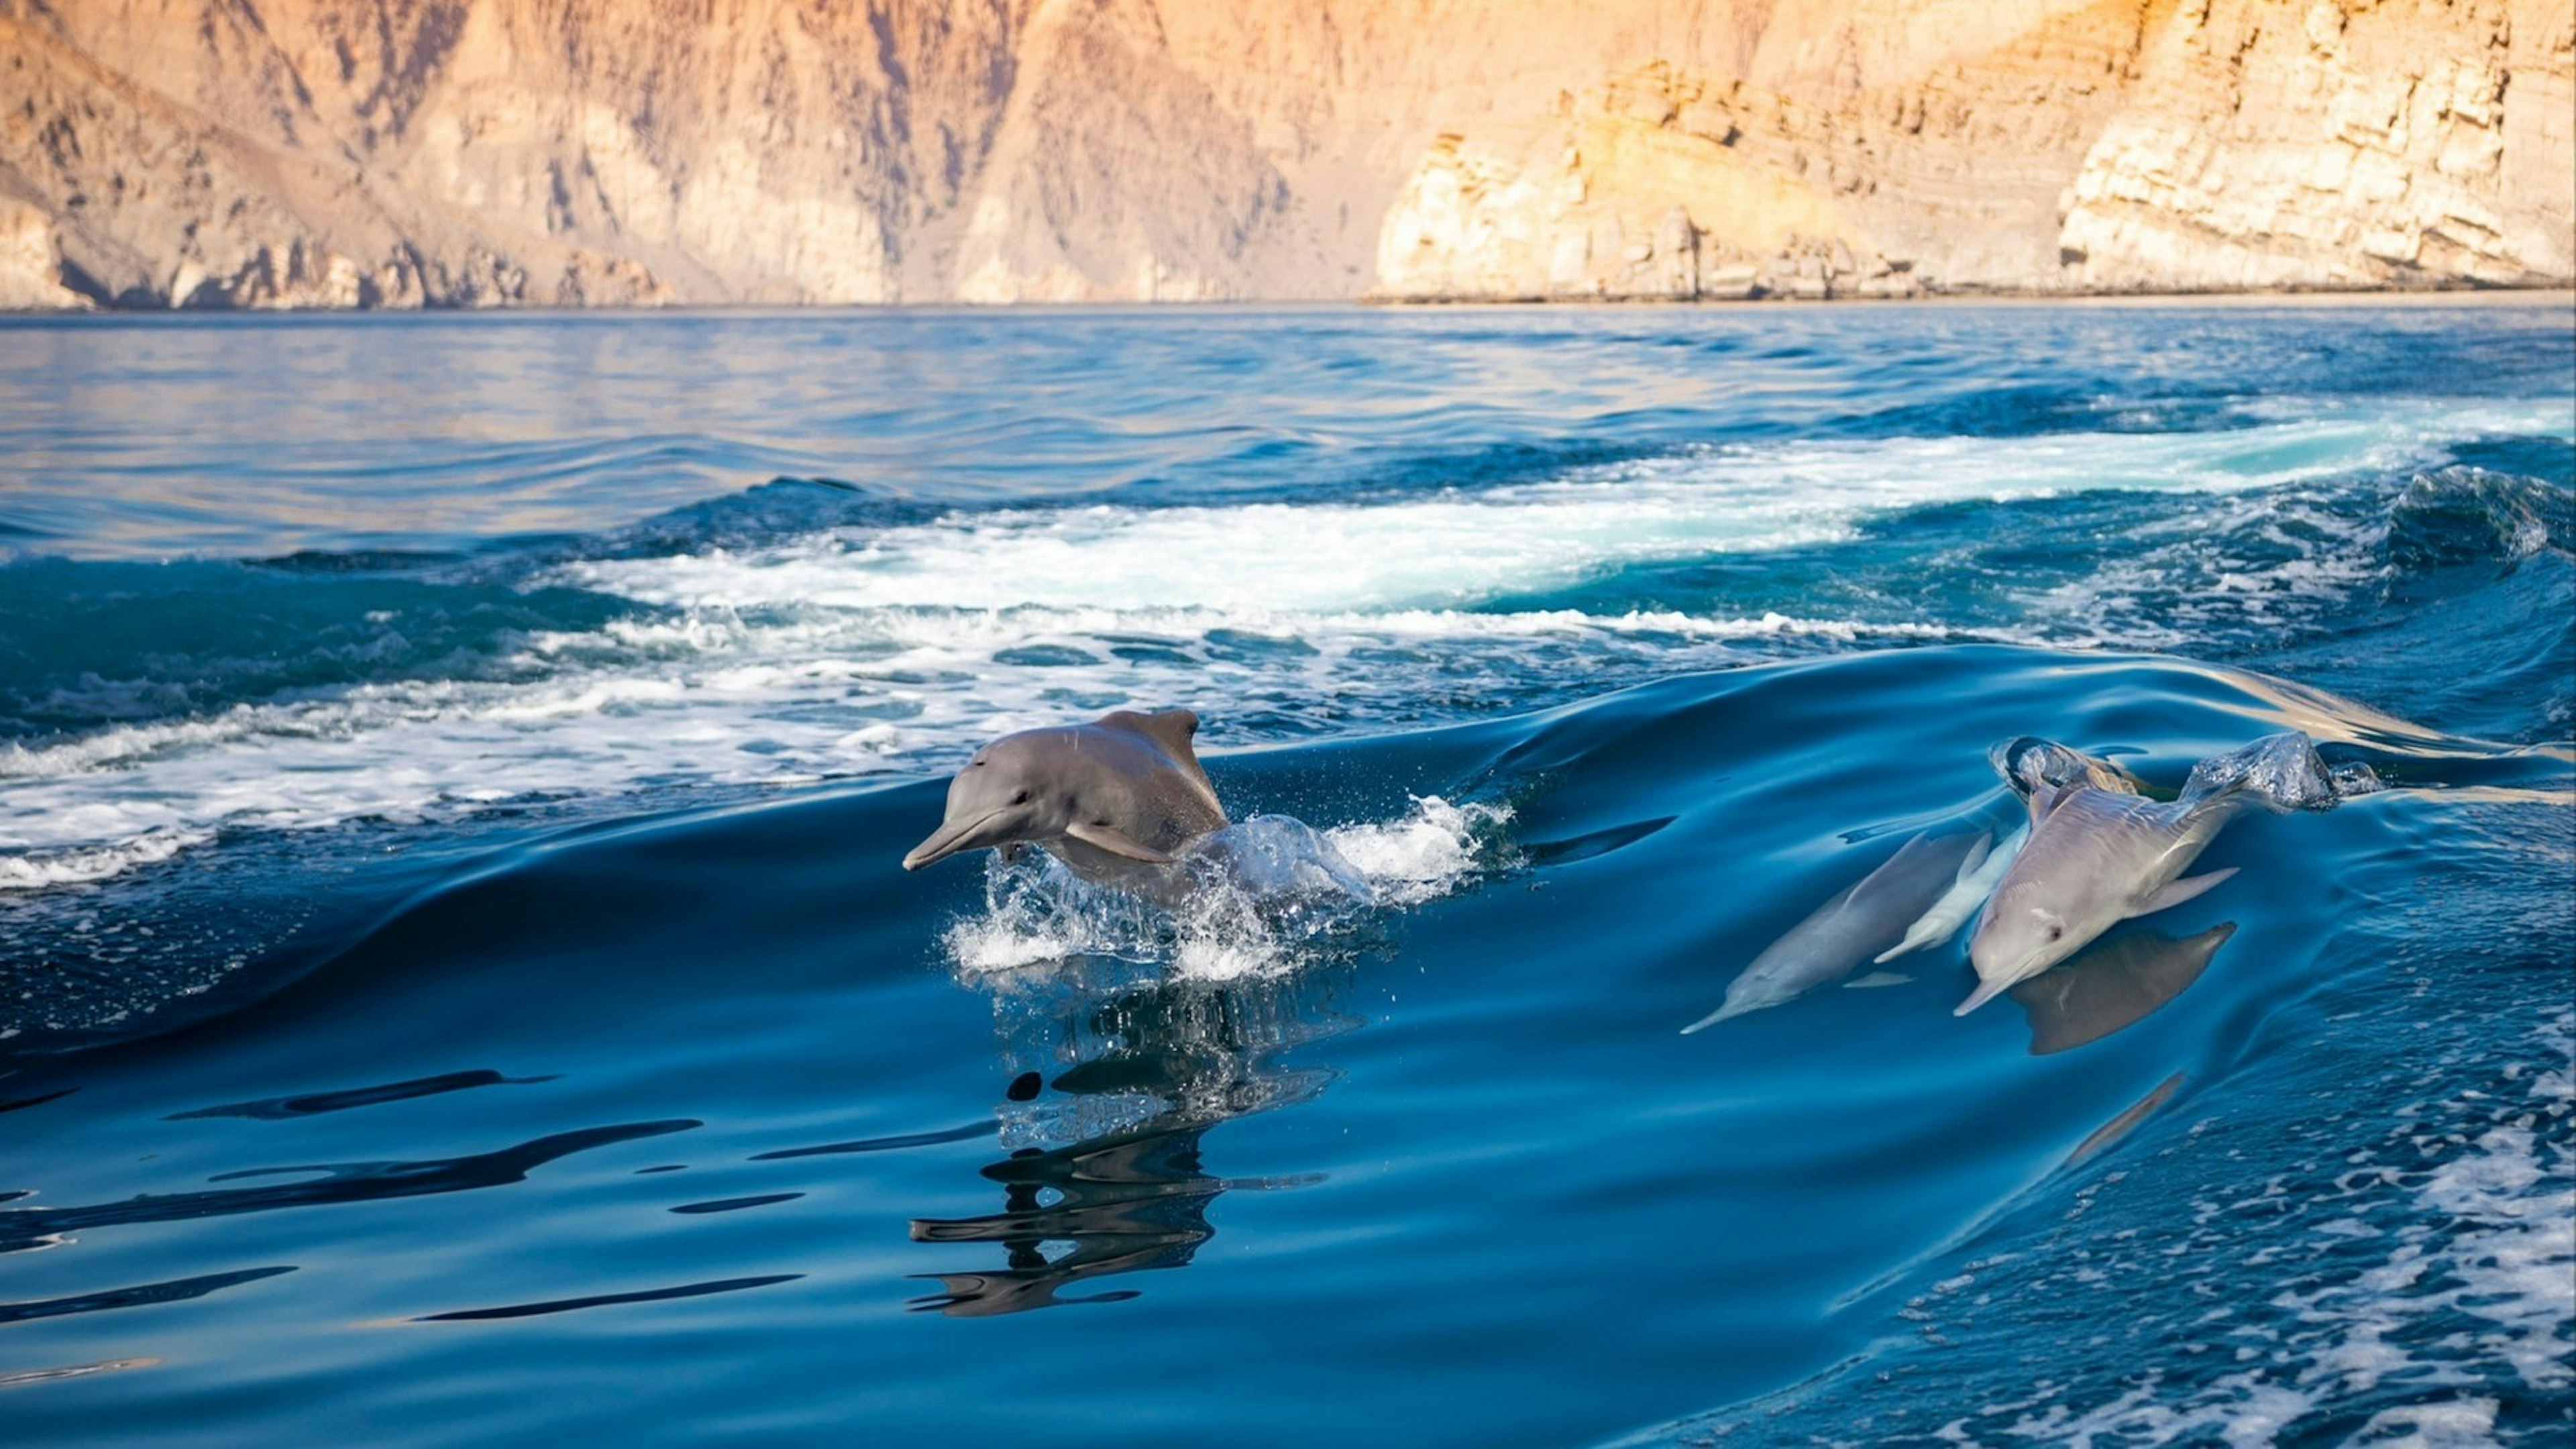 dolphins in Oman. dolphins jumping